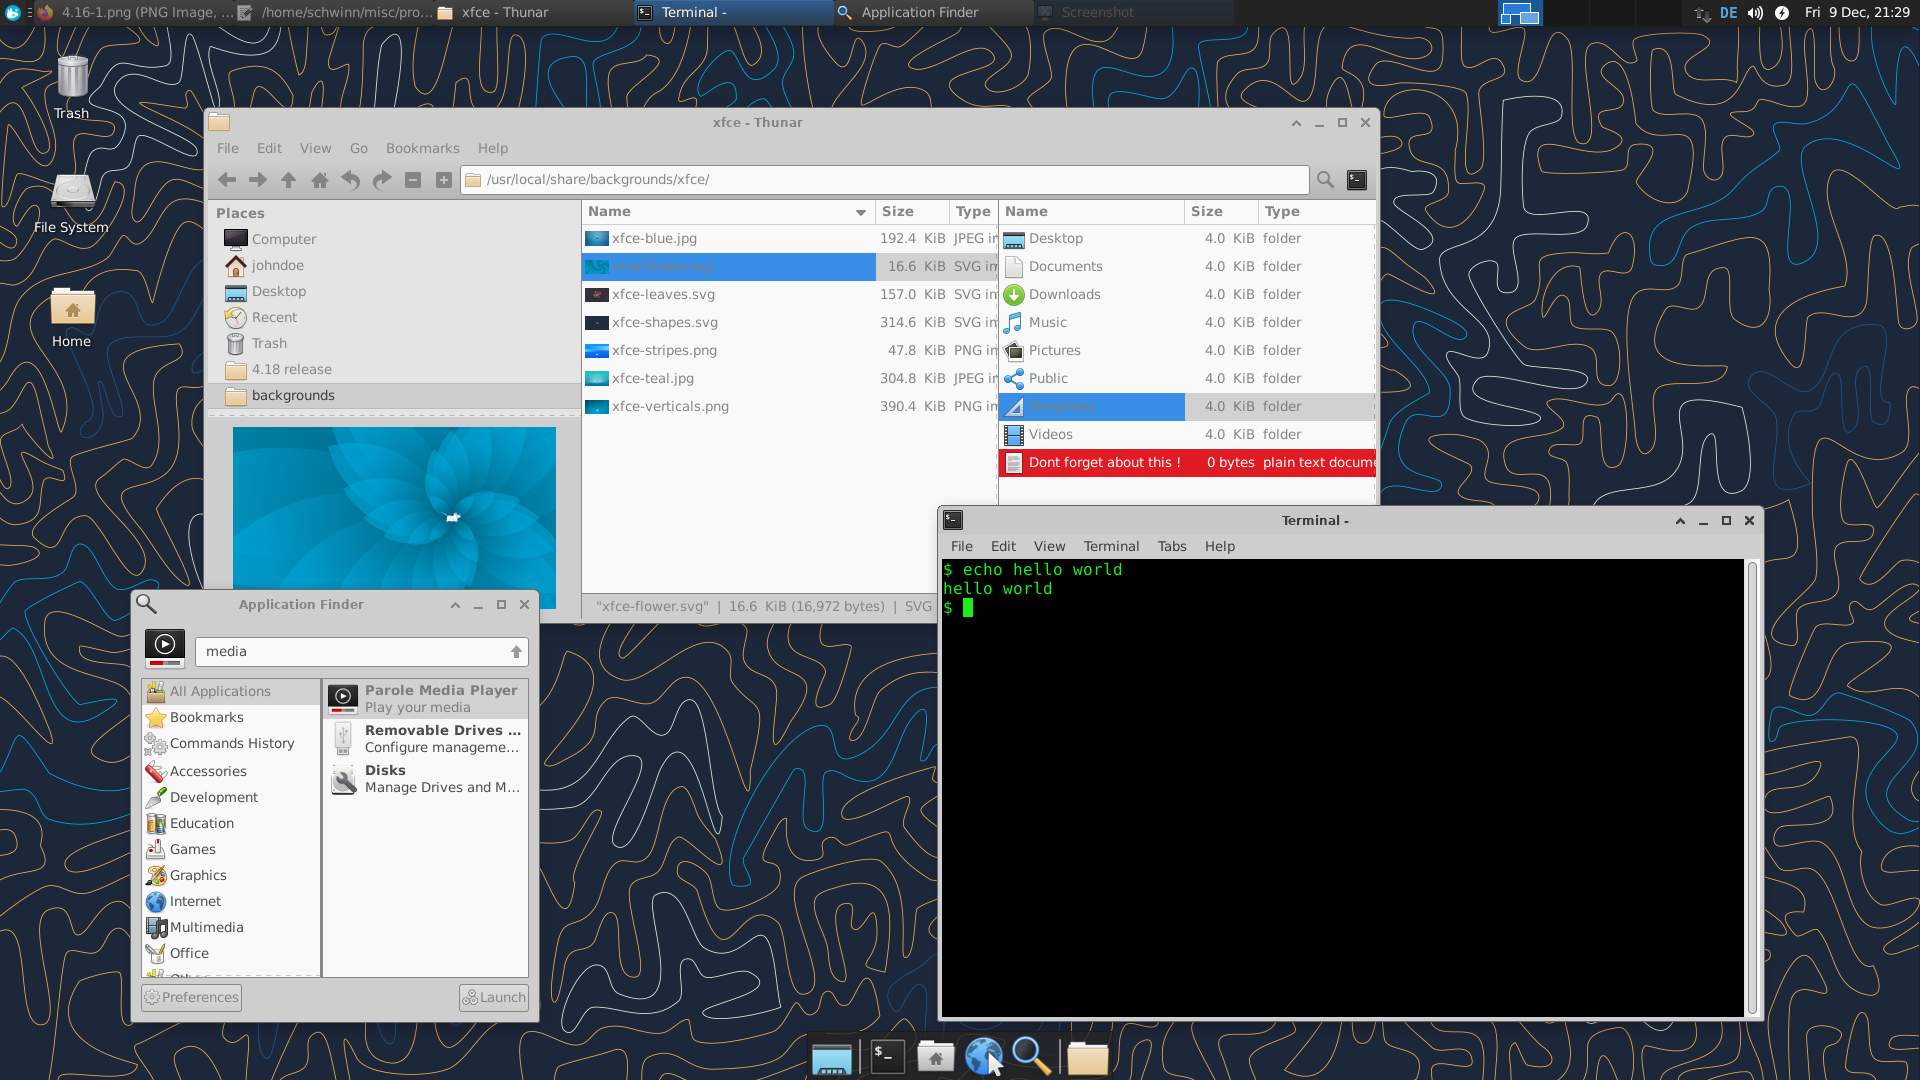 Add Dynamic Wallpapers to Your GNOME Desktop - OMG! Linux